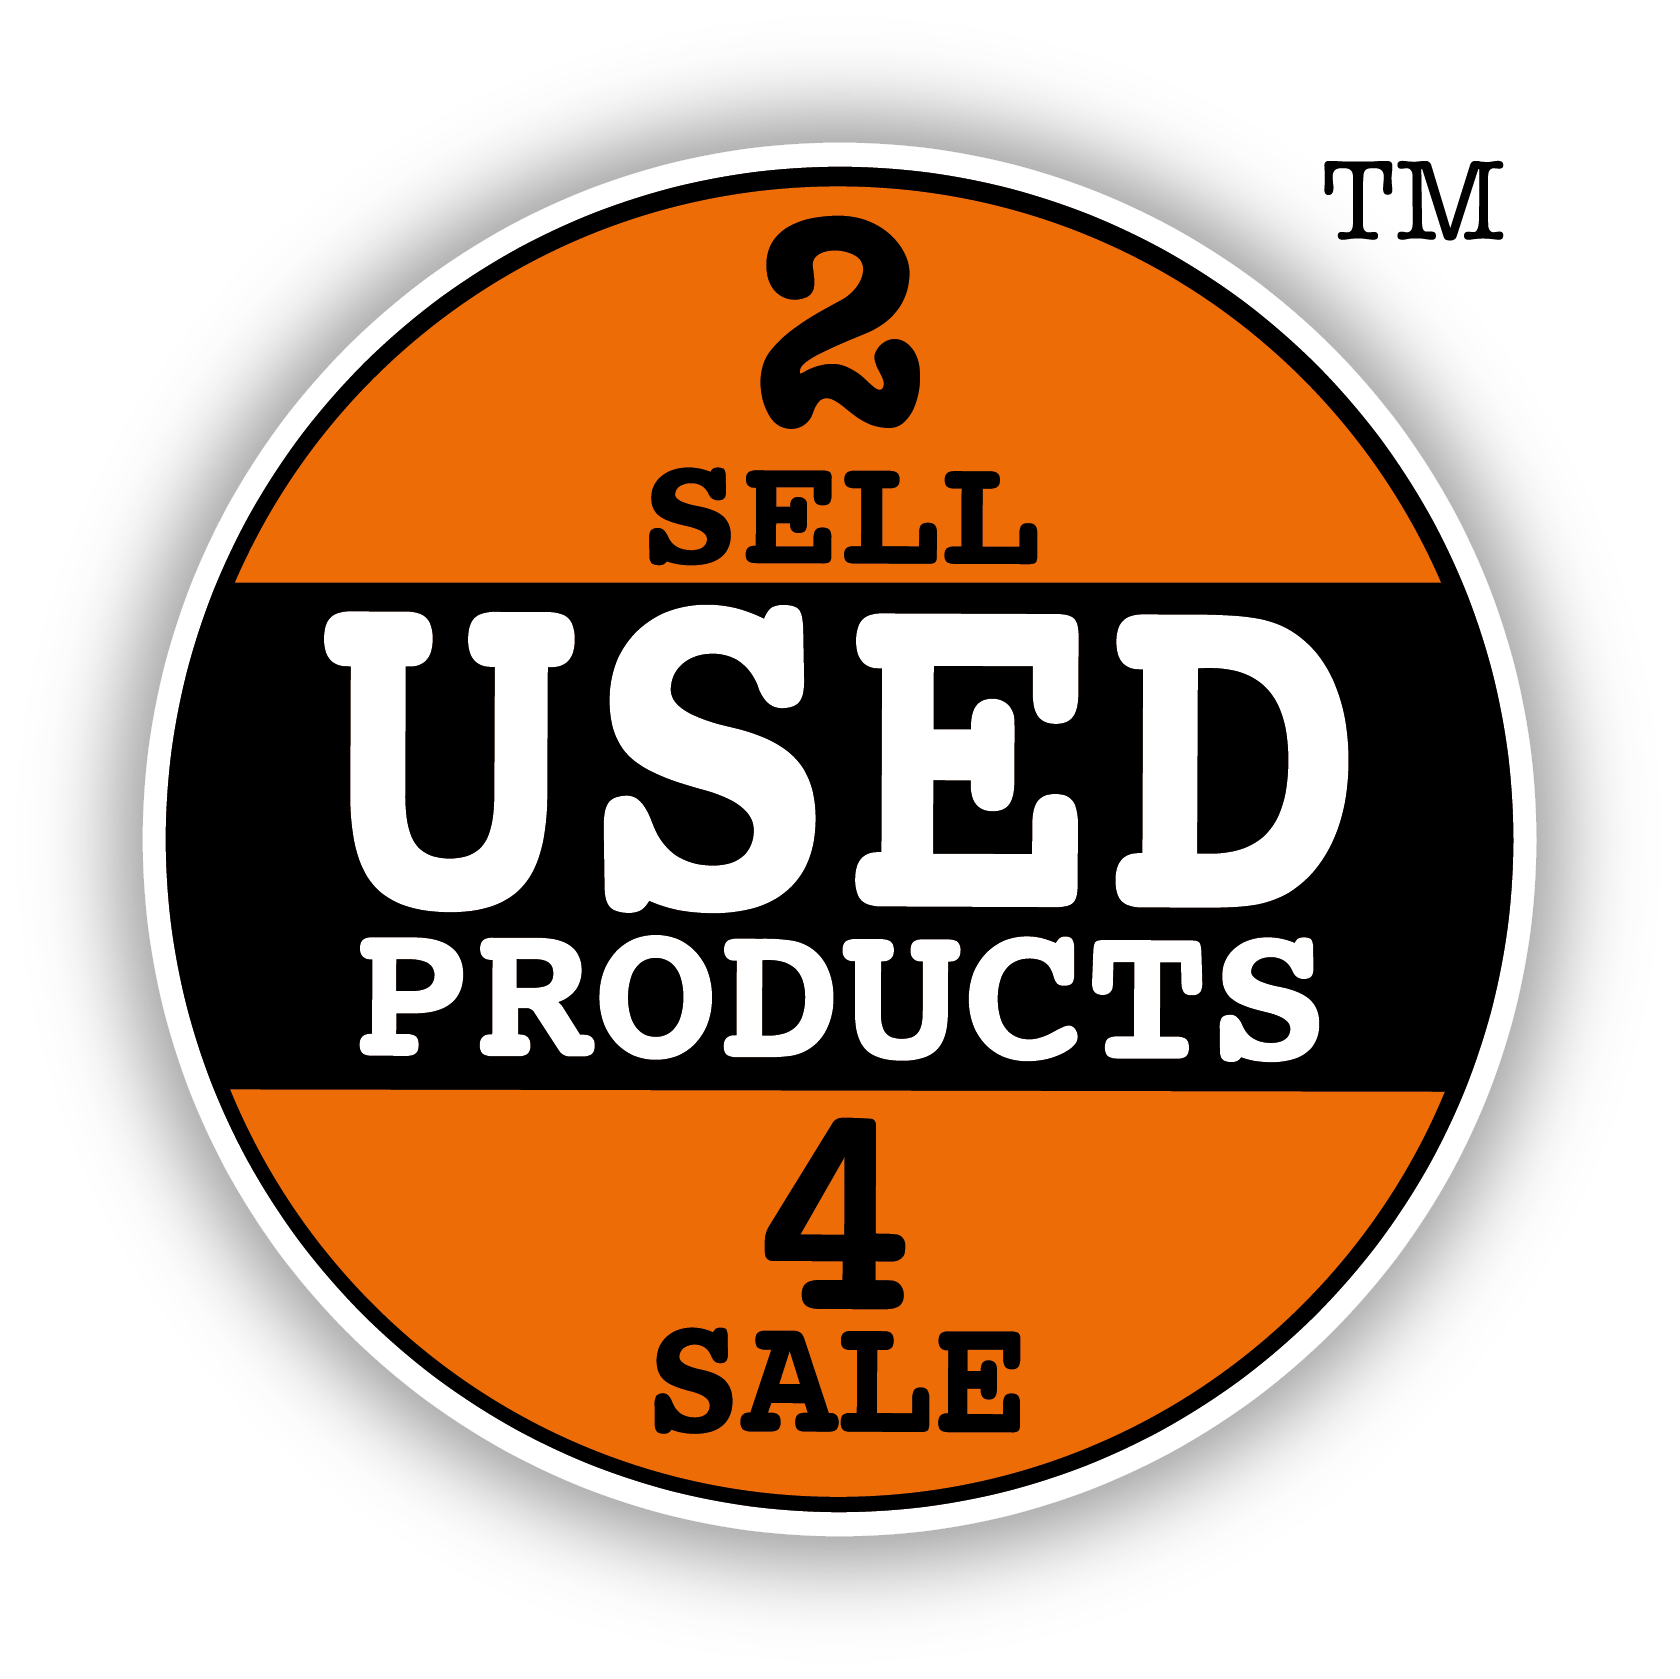 Used Products